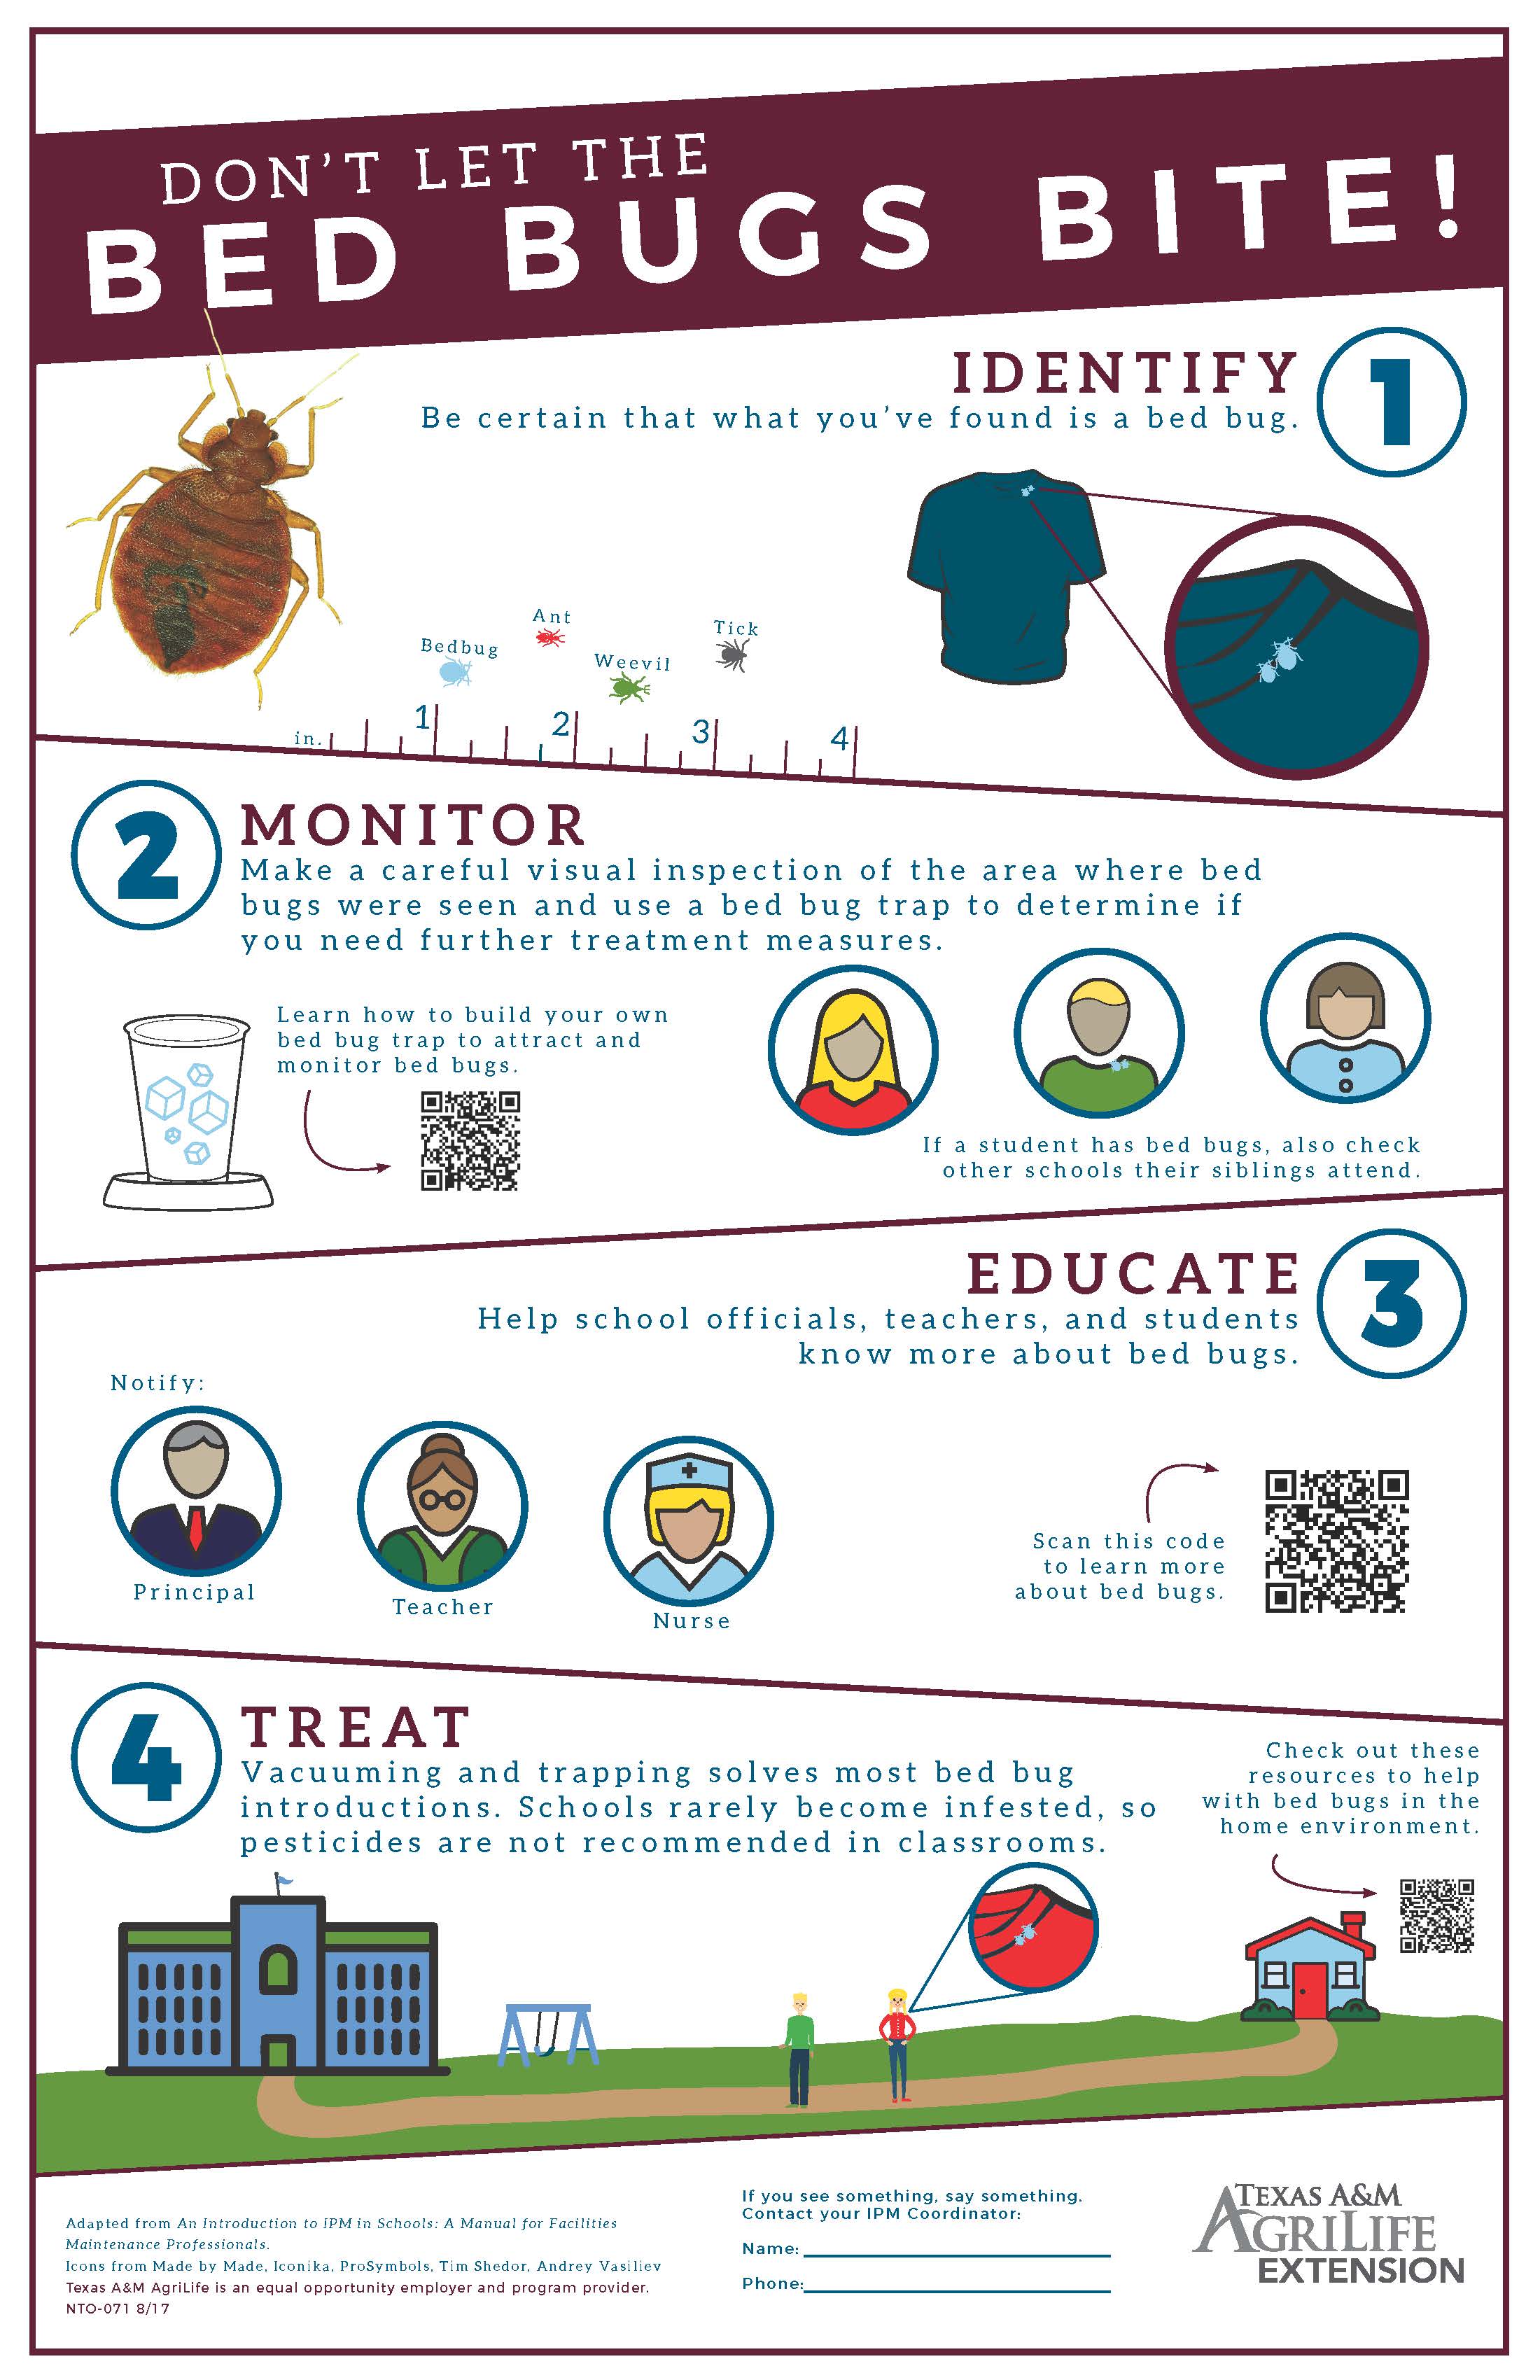 Are bed bugs worse than we thought? School Integrated Pest Management